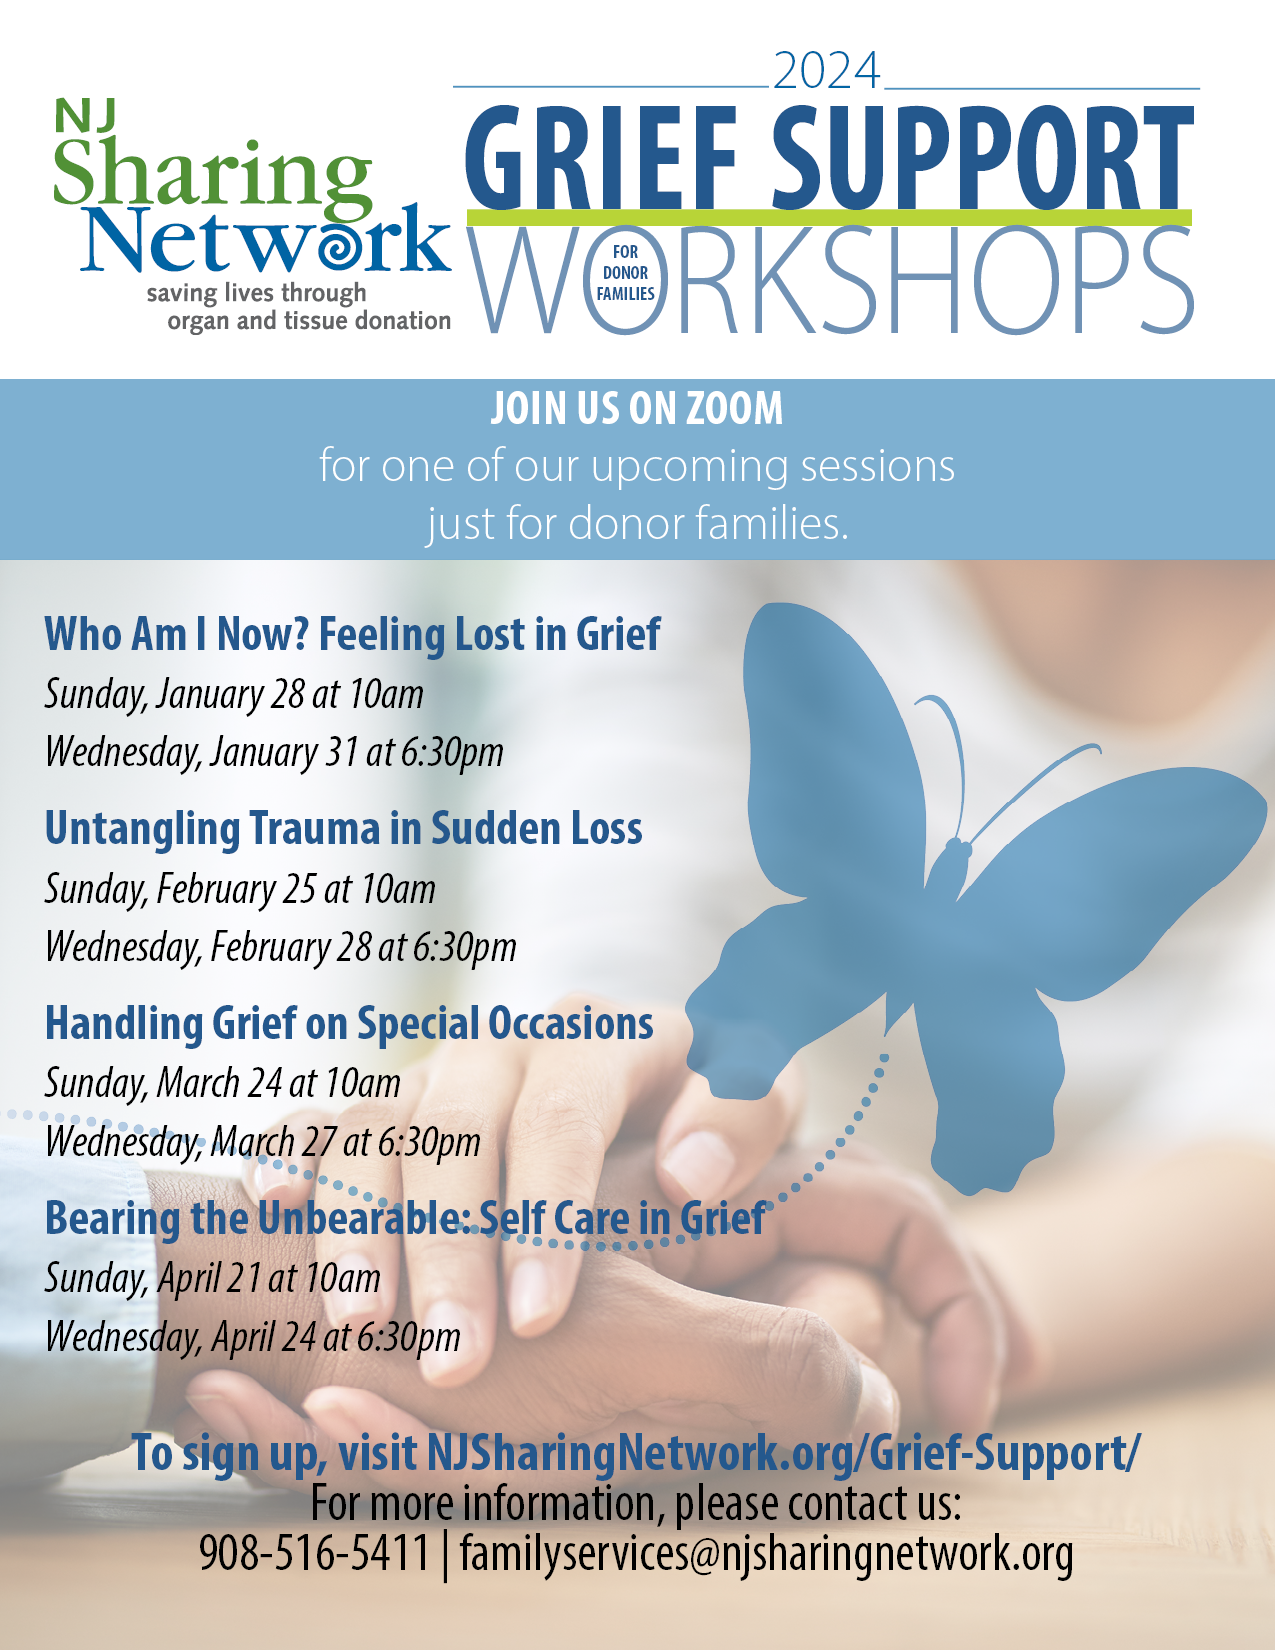 Grief Support Workshop - Untangling Trauma in Sudden Loss